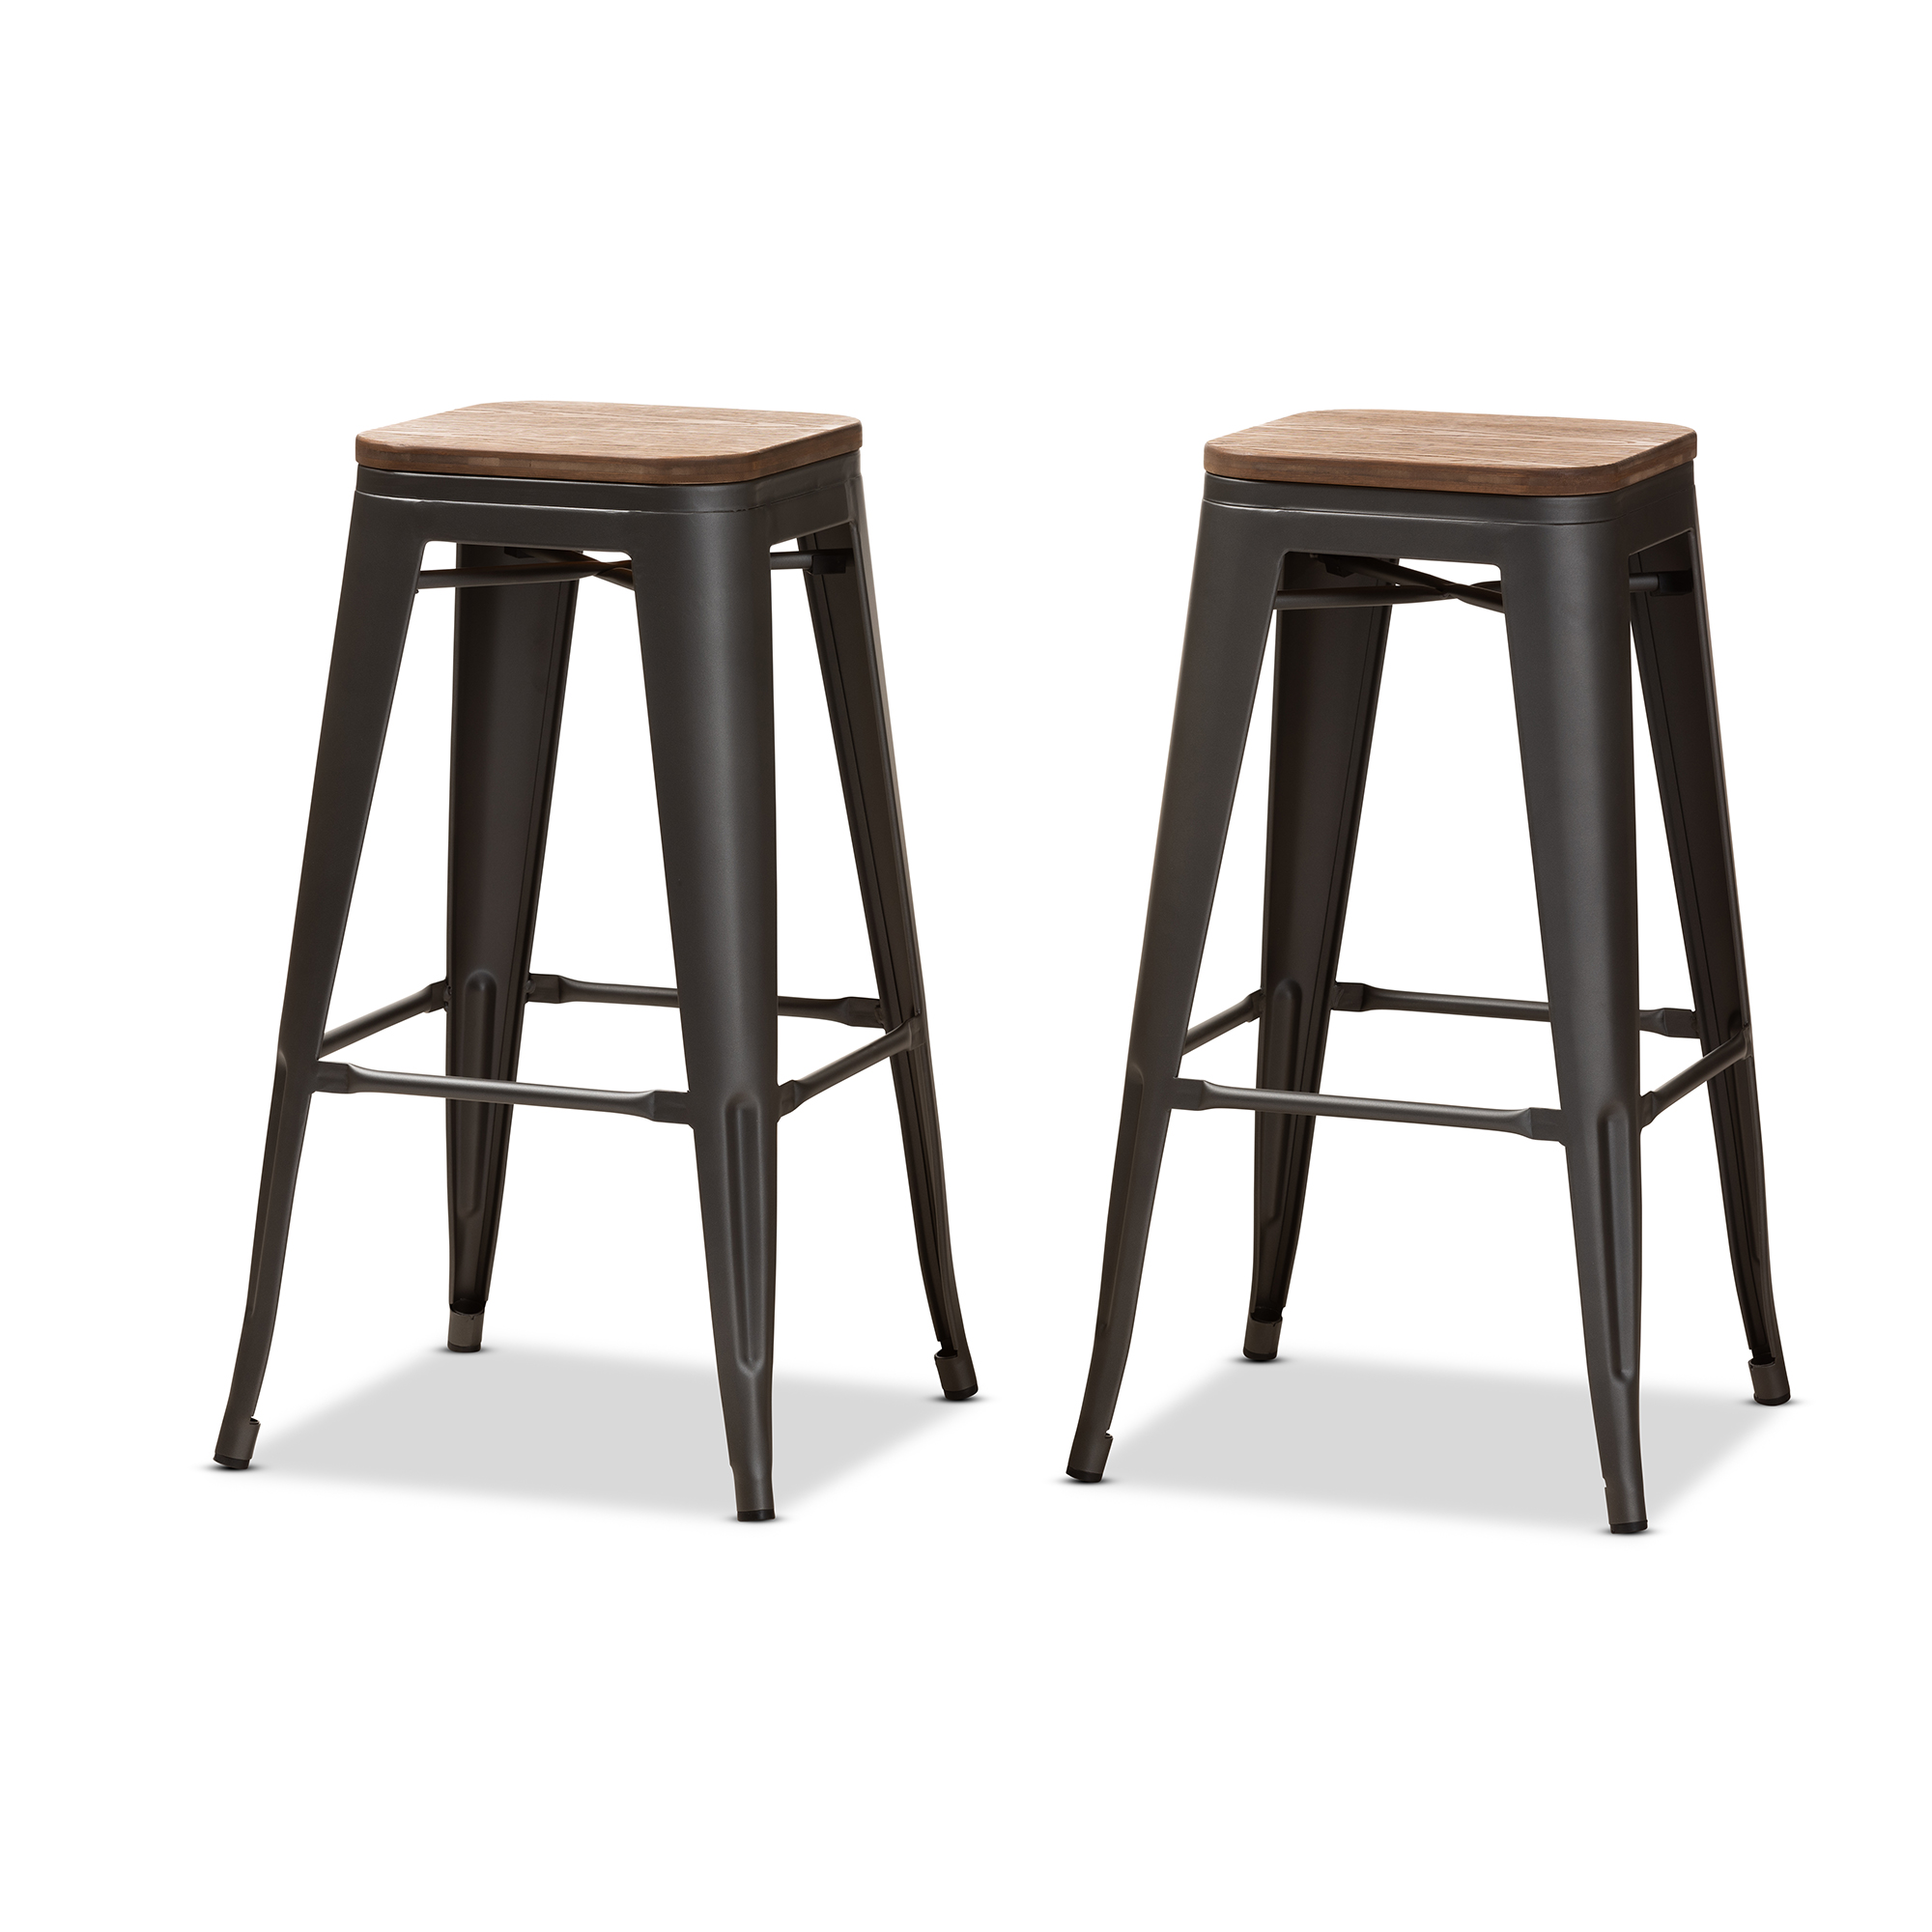 Baxton Studio Henri Vintage Rustic Industrial Style Tolix-Inspired Bamboo and Gun Metal-Finished Steel Stackable Bar Stool Set of 2